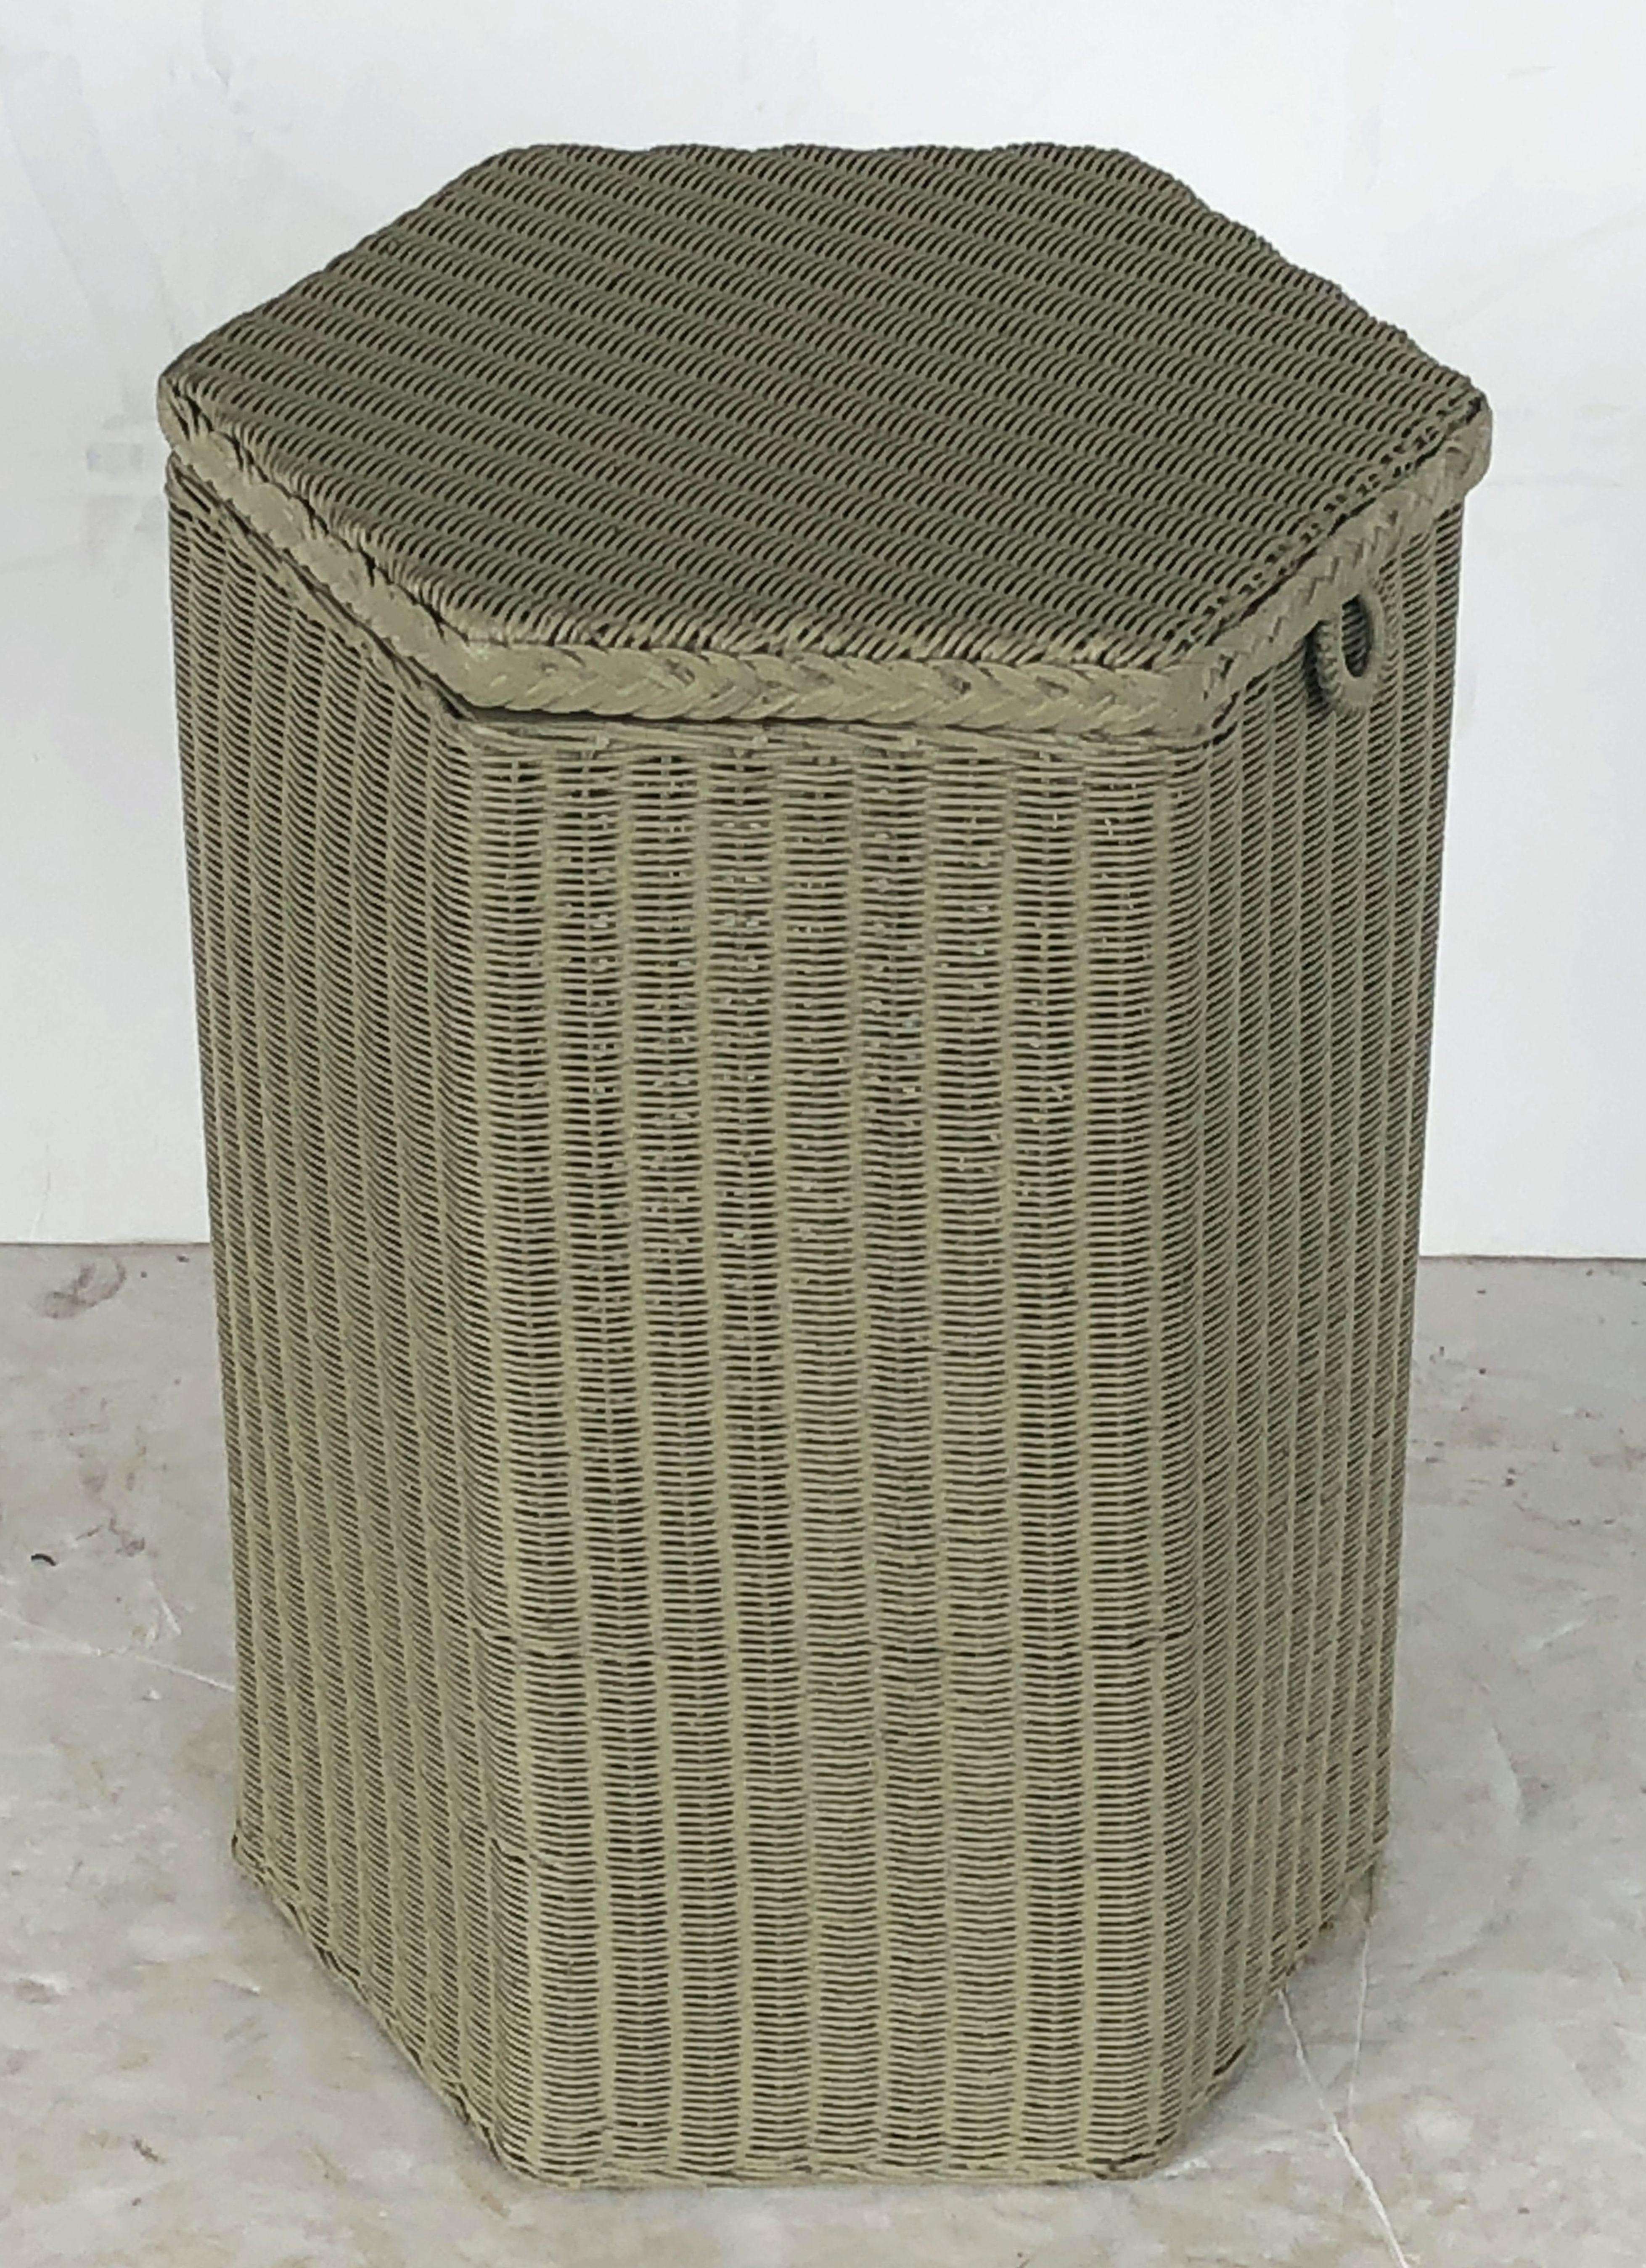 A fine Lloyd Loom hexagonal linen hamper or basket, synonymous with Classic English style, featuring a tall six-sided hamper with hinged lid of woven wicker and wire over a wood frame stretcher.

Perfect for an indoor or outdoor garden room, garden,